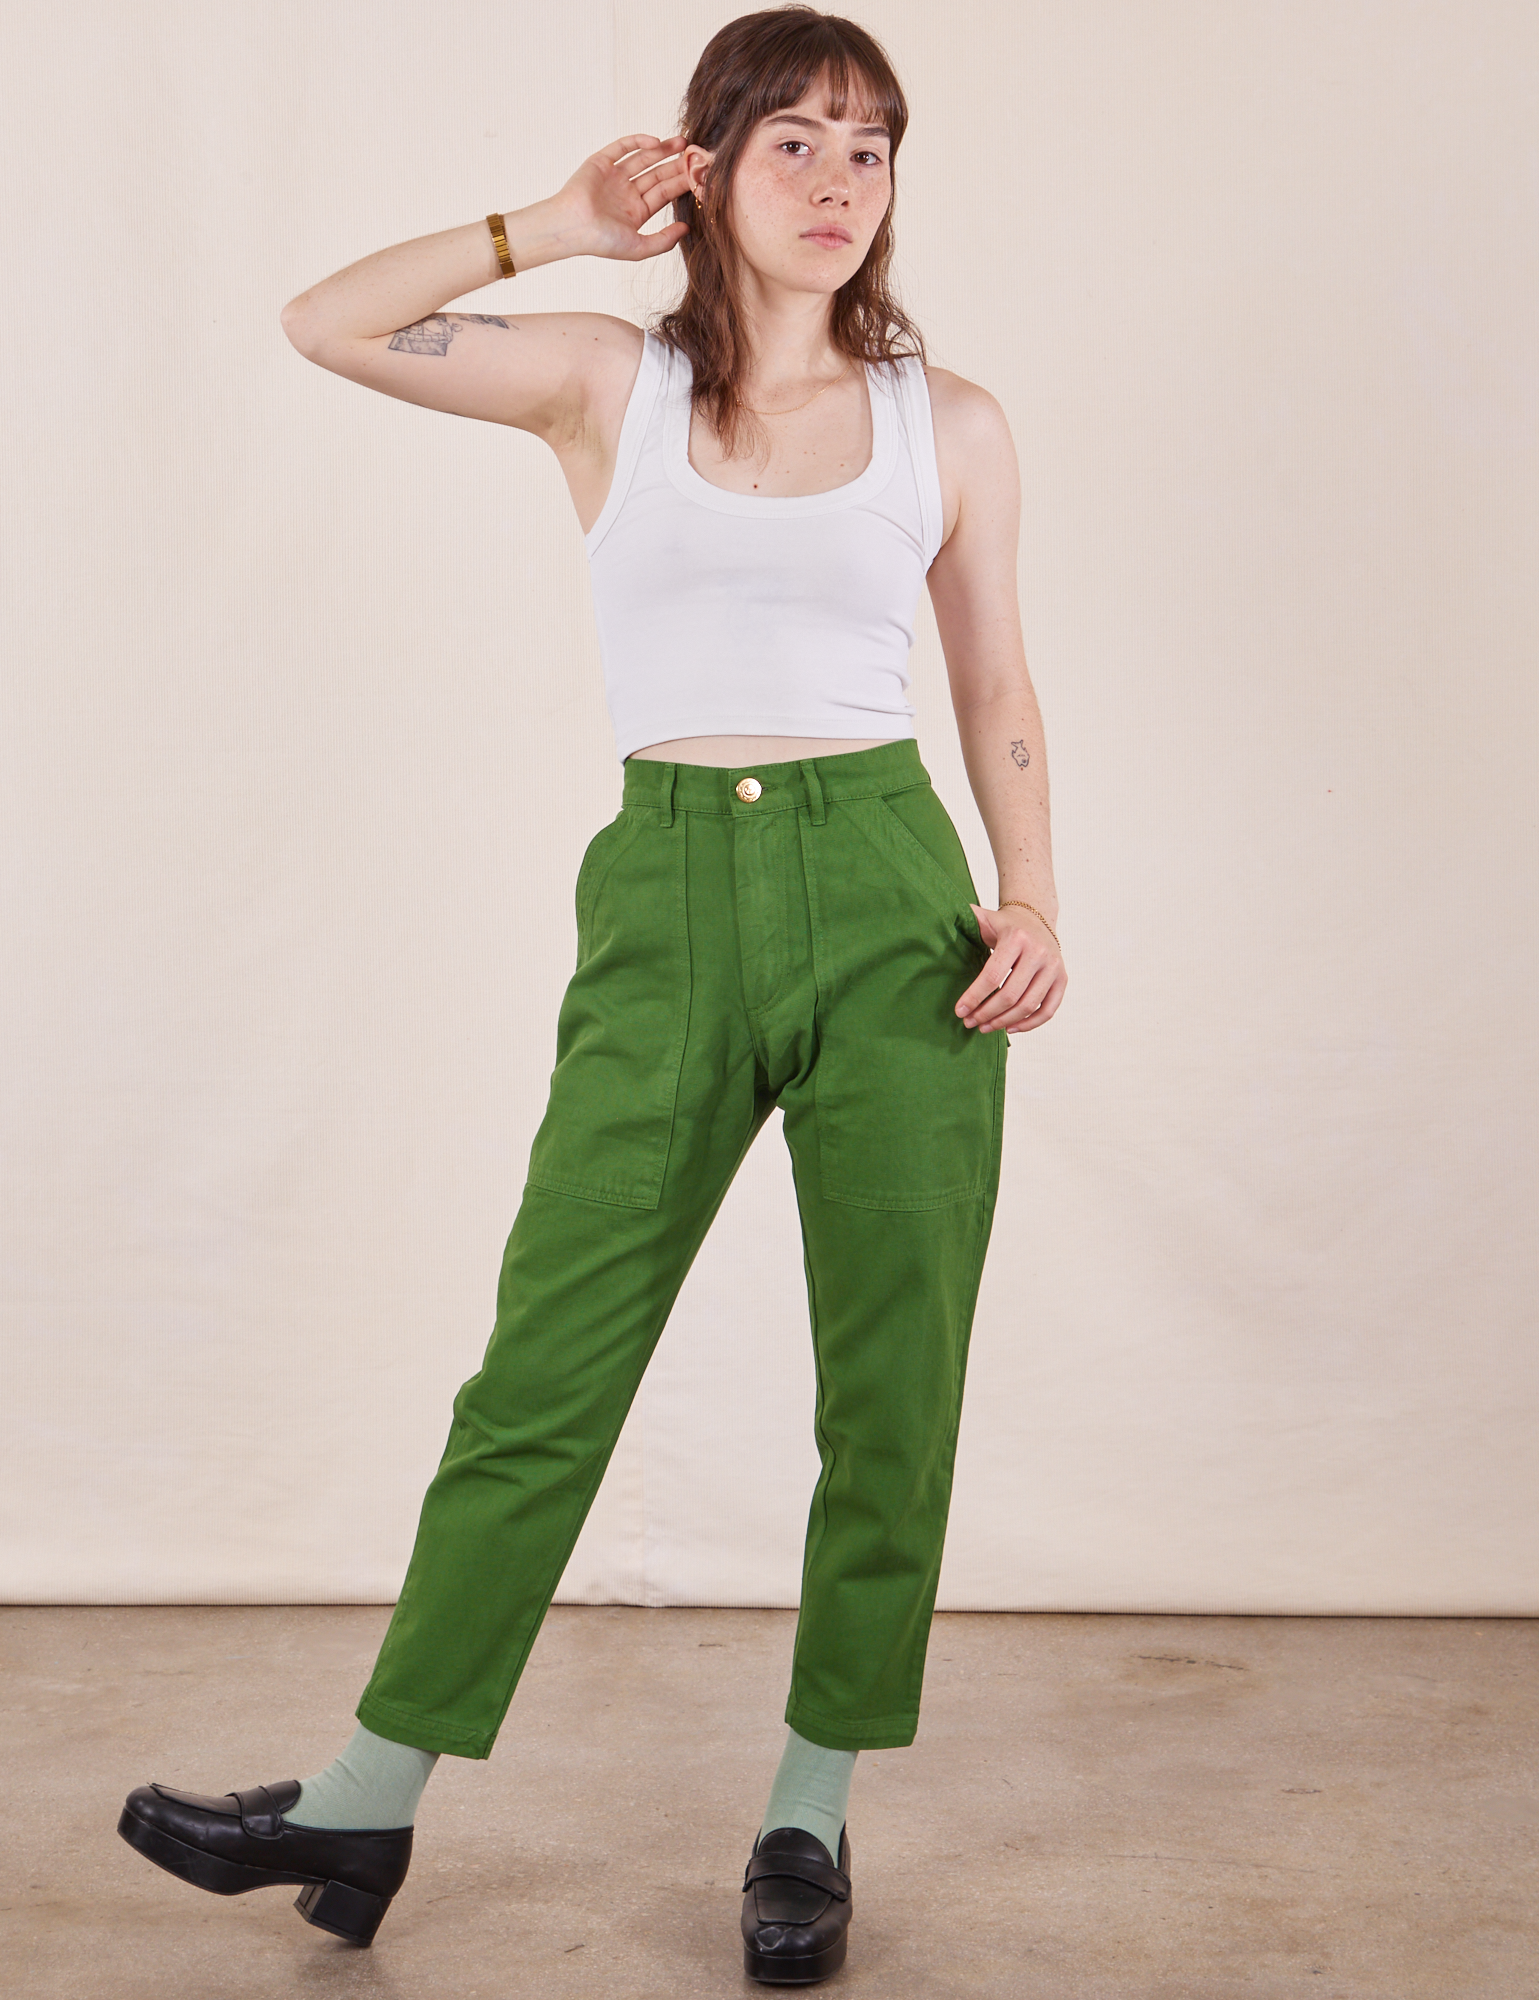 Hana is wearing Petite Pencil Pants in Lawn Green and Cropped Tank Top in vintage tee off-white 